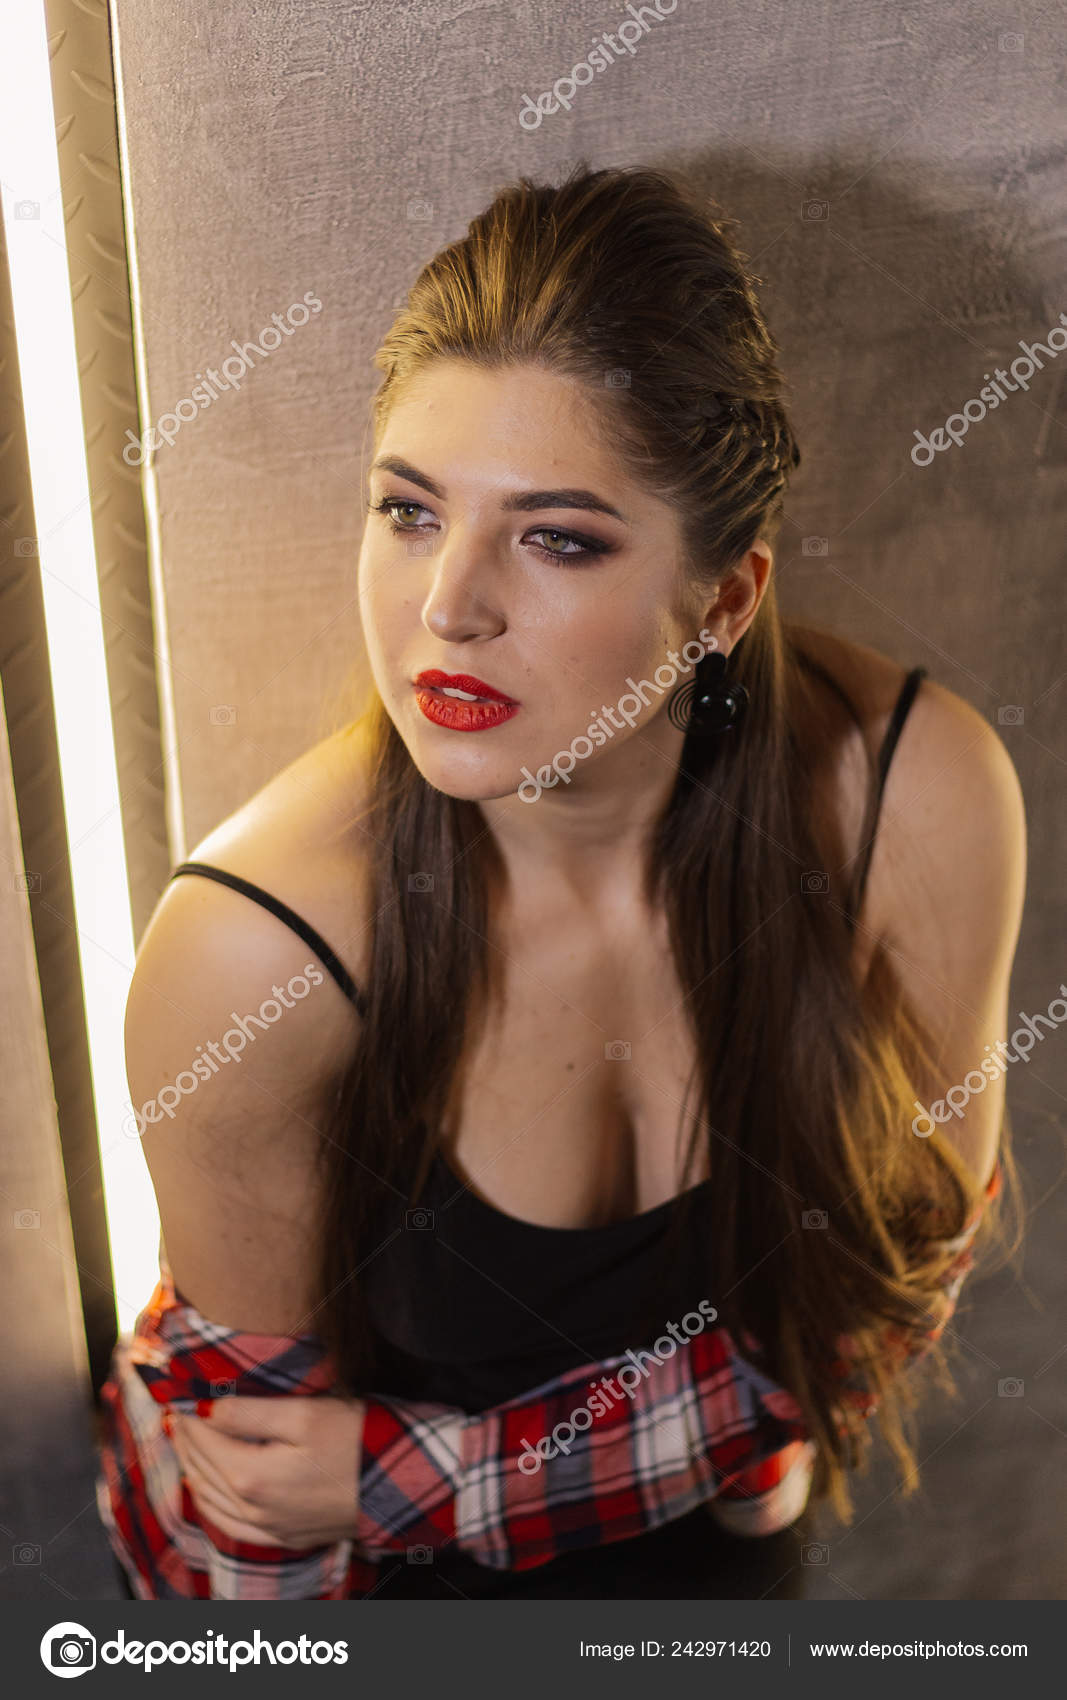 Natural Light Indoor Portrait Of Young Pretty Girl With Long